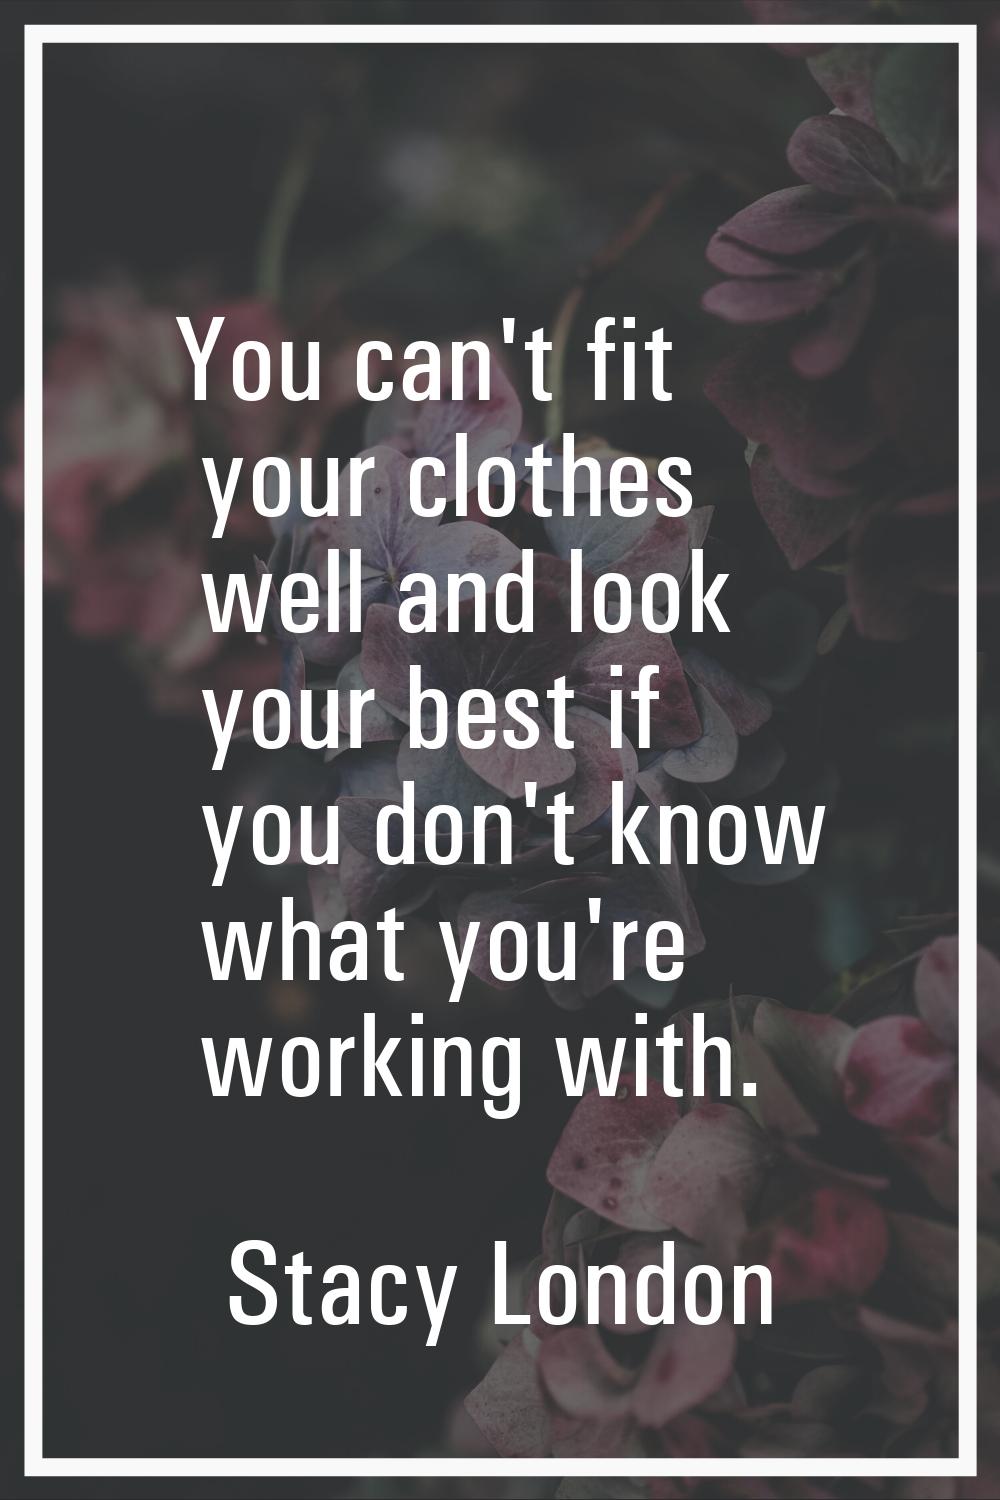 You can't fit your clothes well and look your best if you don't know what you're working with.